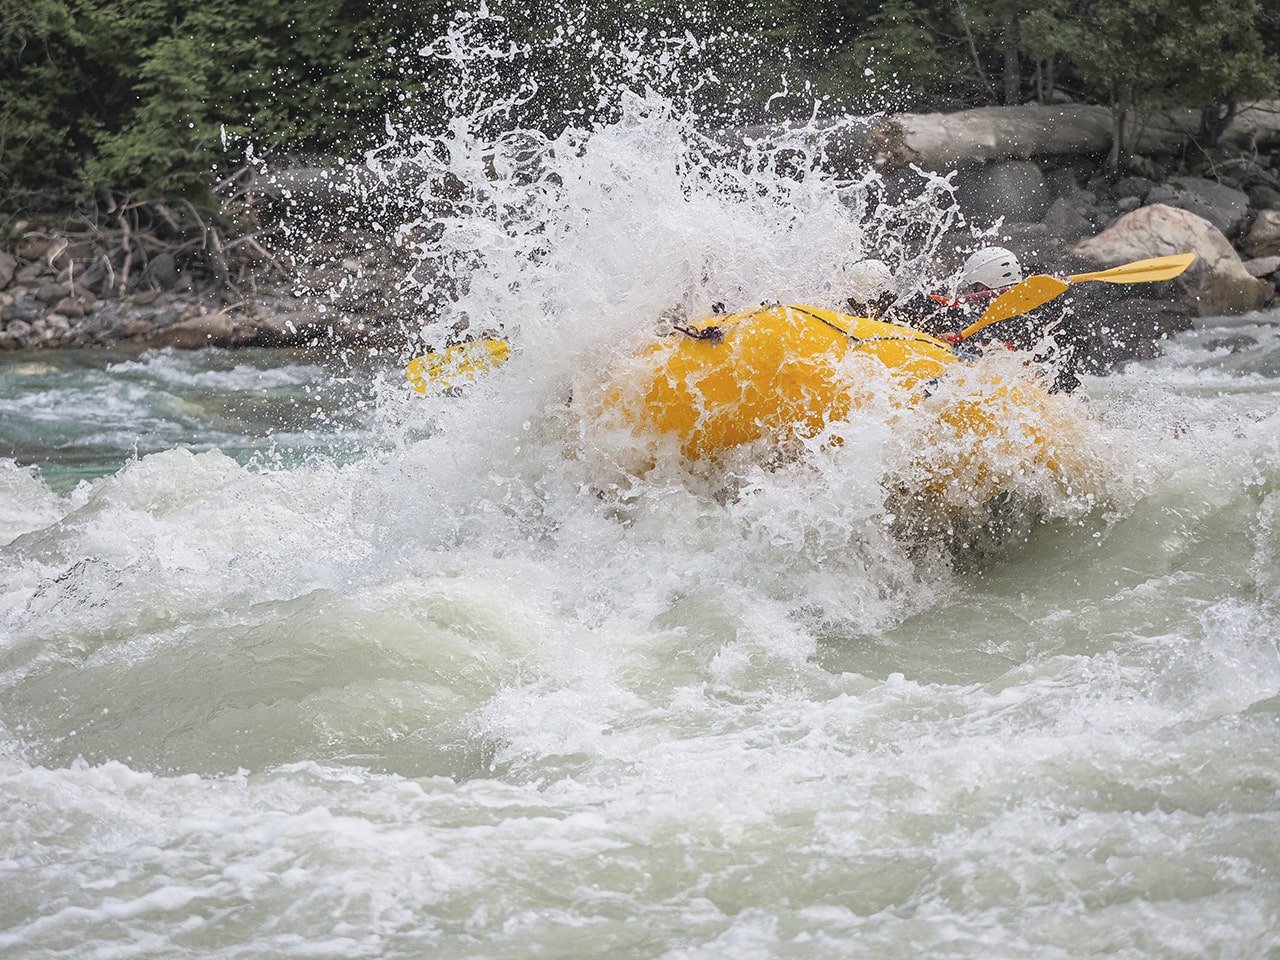 Big splashes while rafting the Kicking Horse River on a rainy day